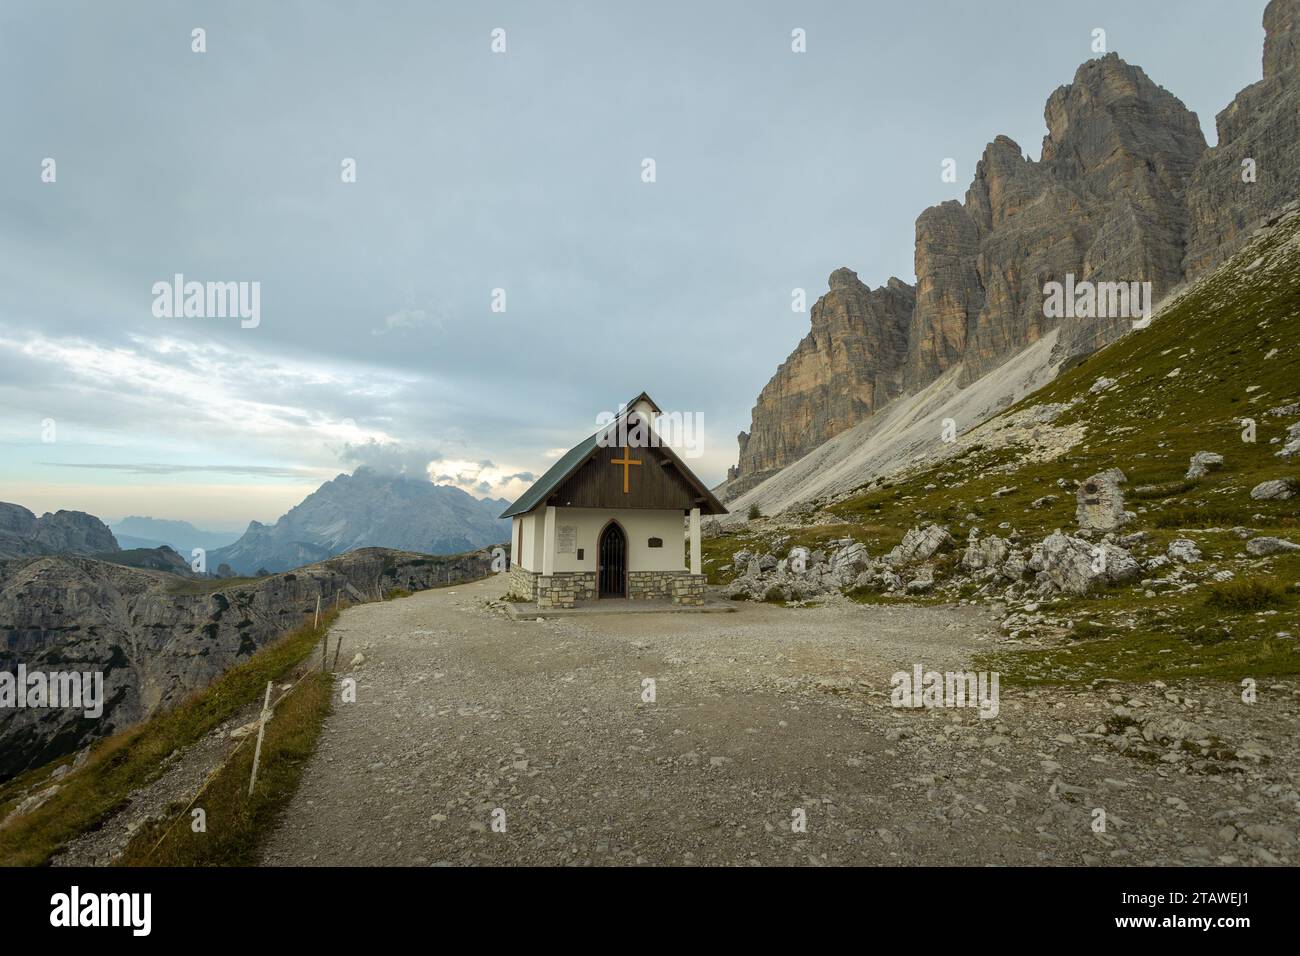 One of the most famous and spectacular views of all the Alps: the locatelli refuge, its church and the three peaks of Lavaredo, inside the Three Peaks Stock Photo